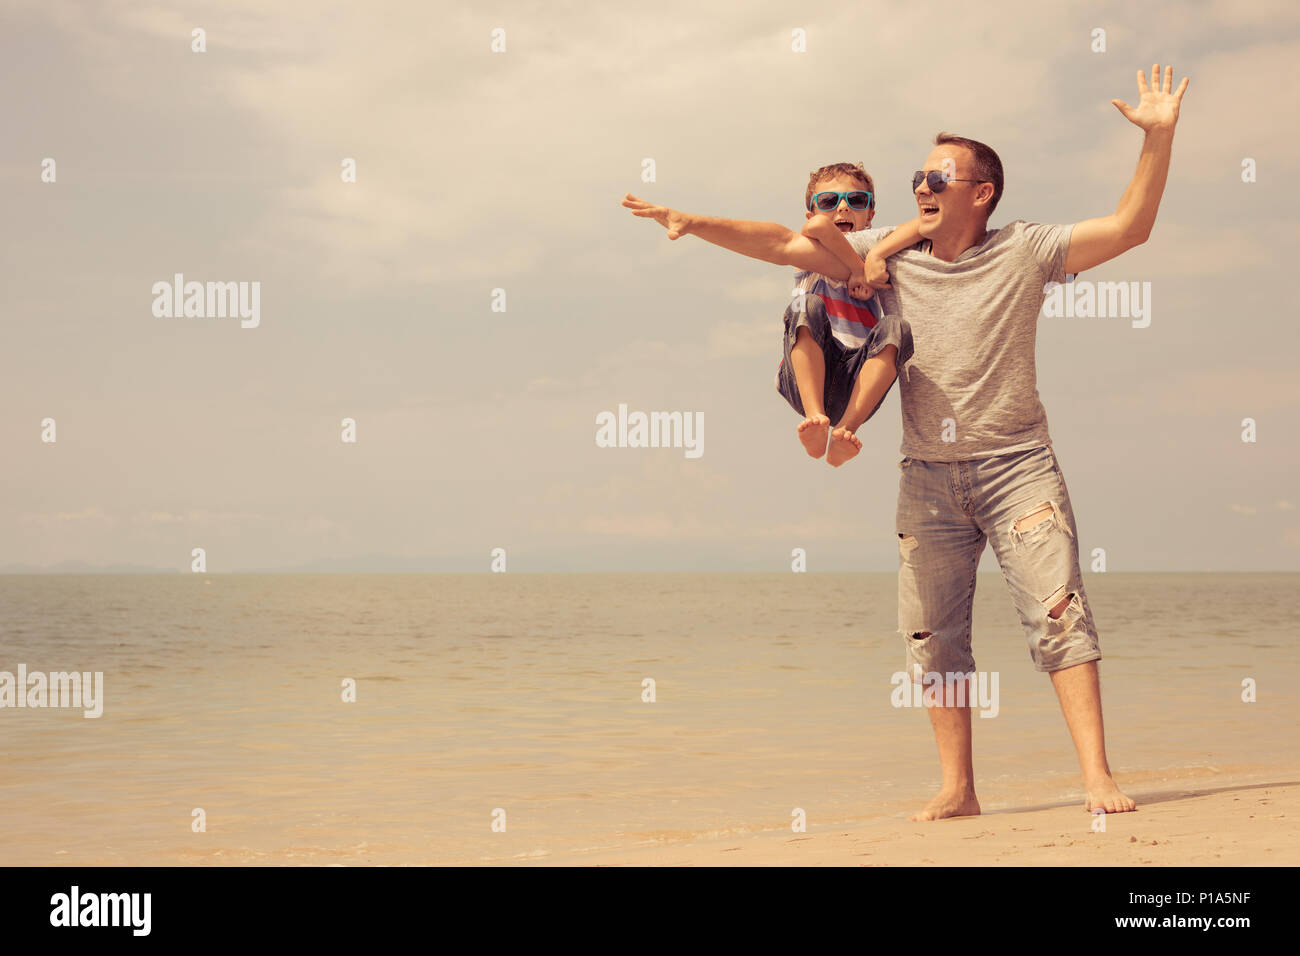 Father and  son playing on the beach at the summer day time. People having fun outdoors. Concept of summer vacation and friendly family. Stock Photo